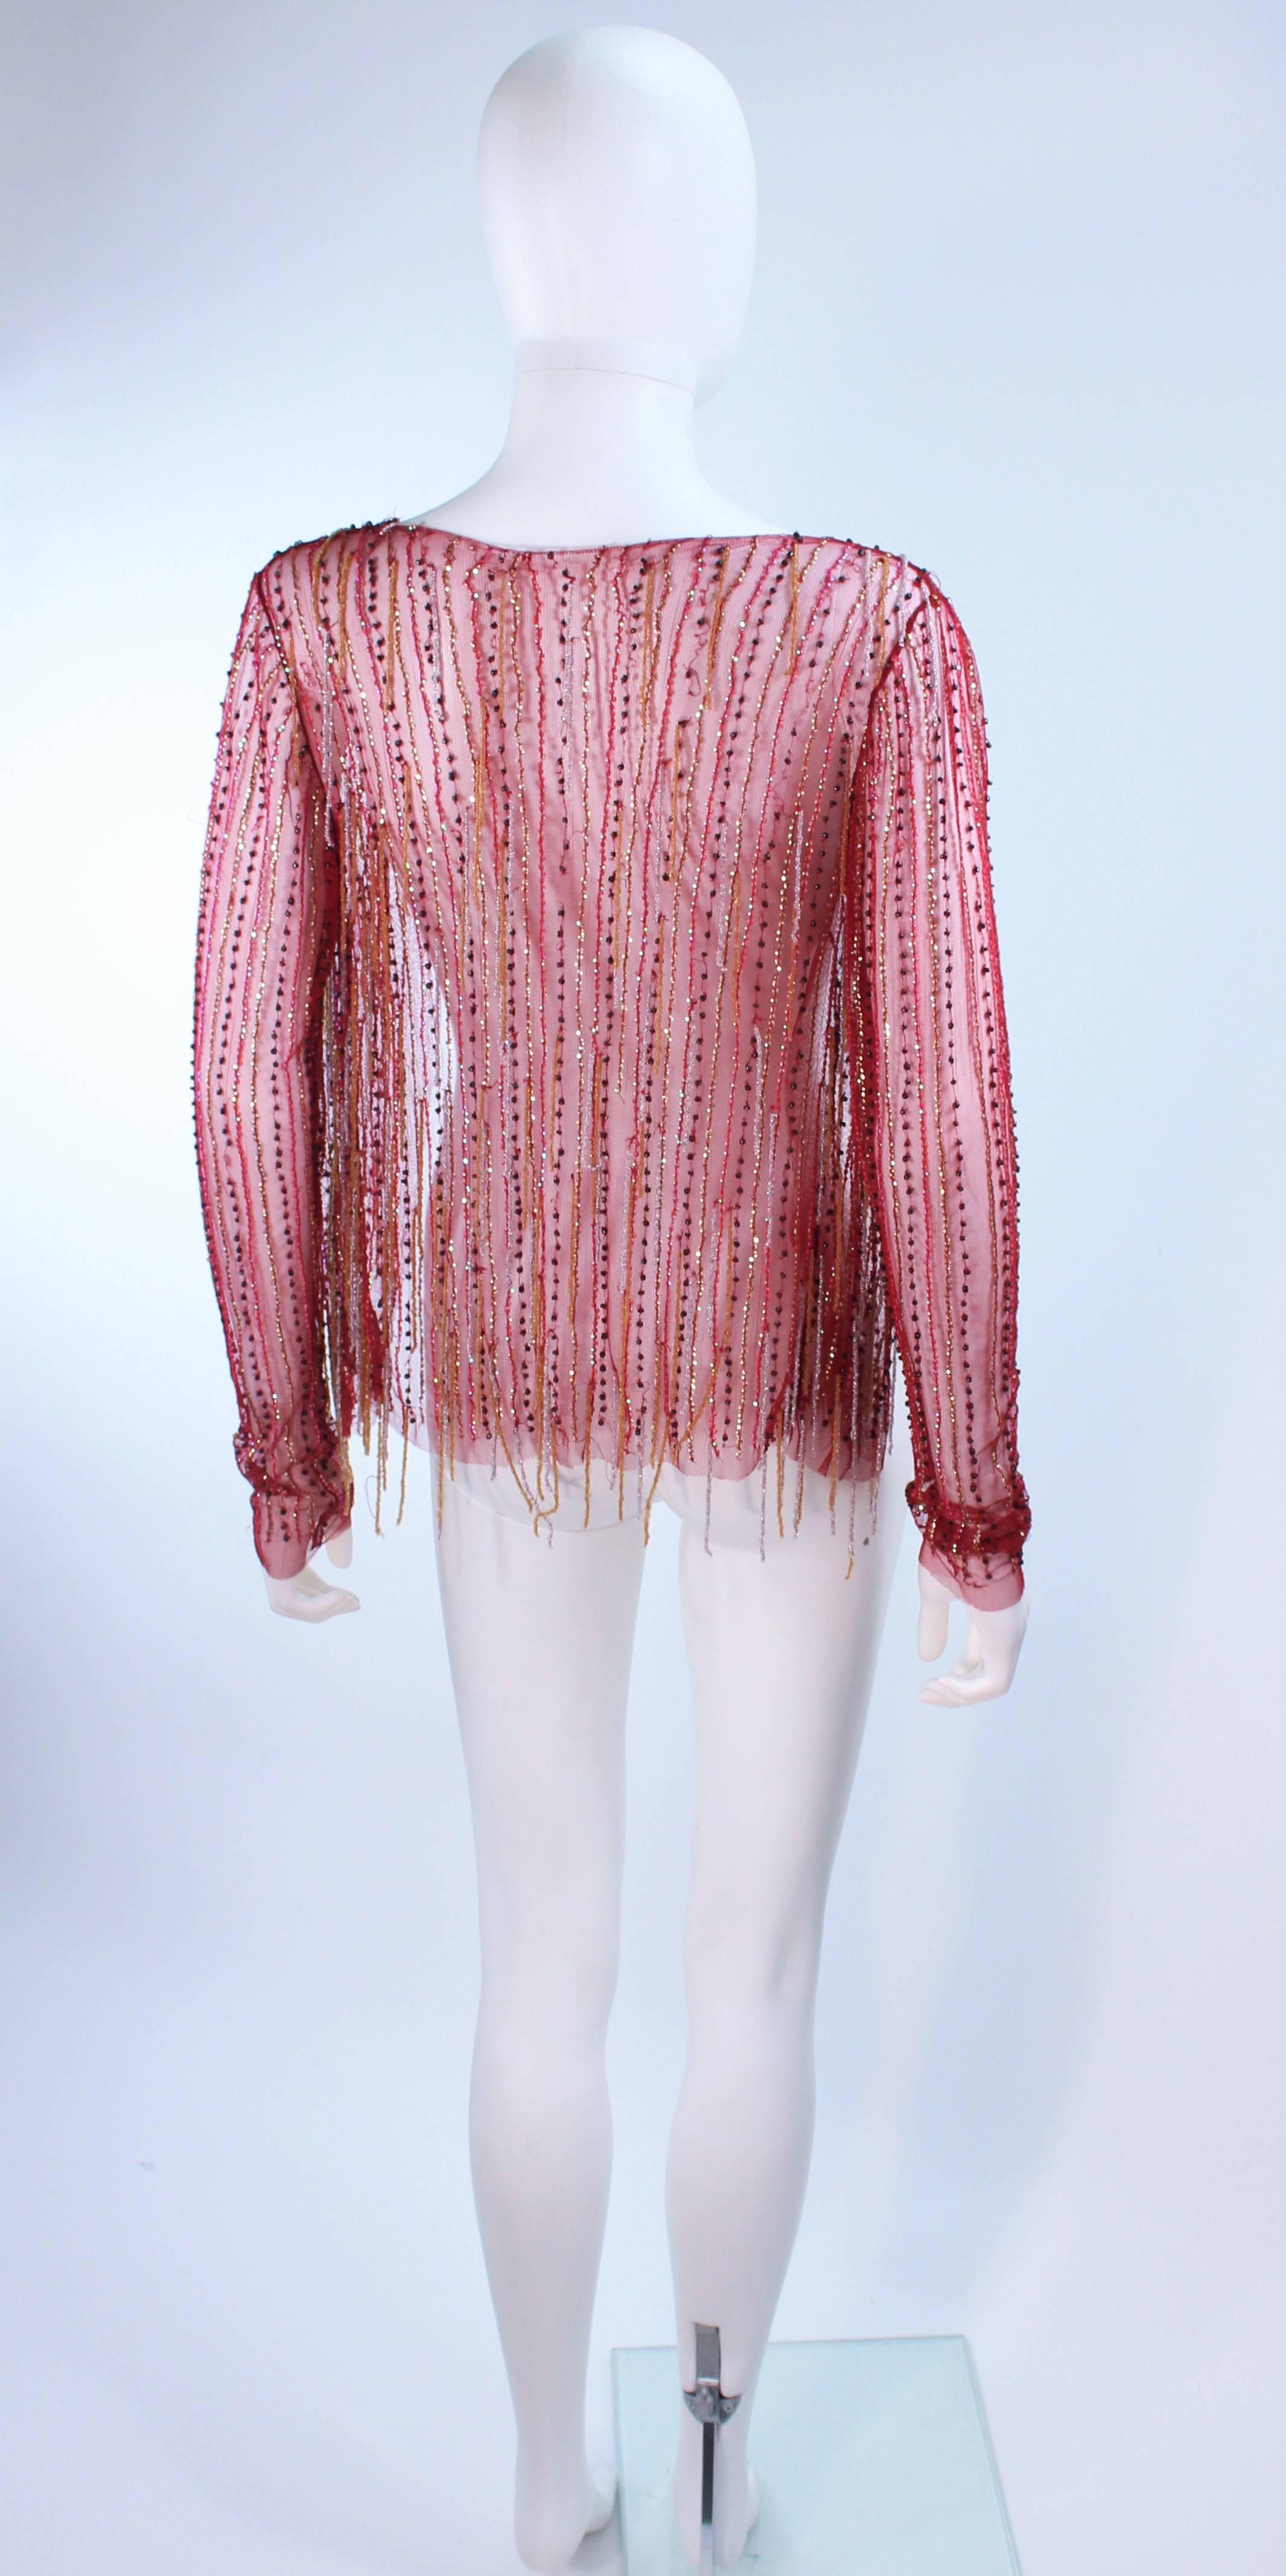 Red Sheer Stretch Mesh Beaded Fringe Top Size Small 3